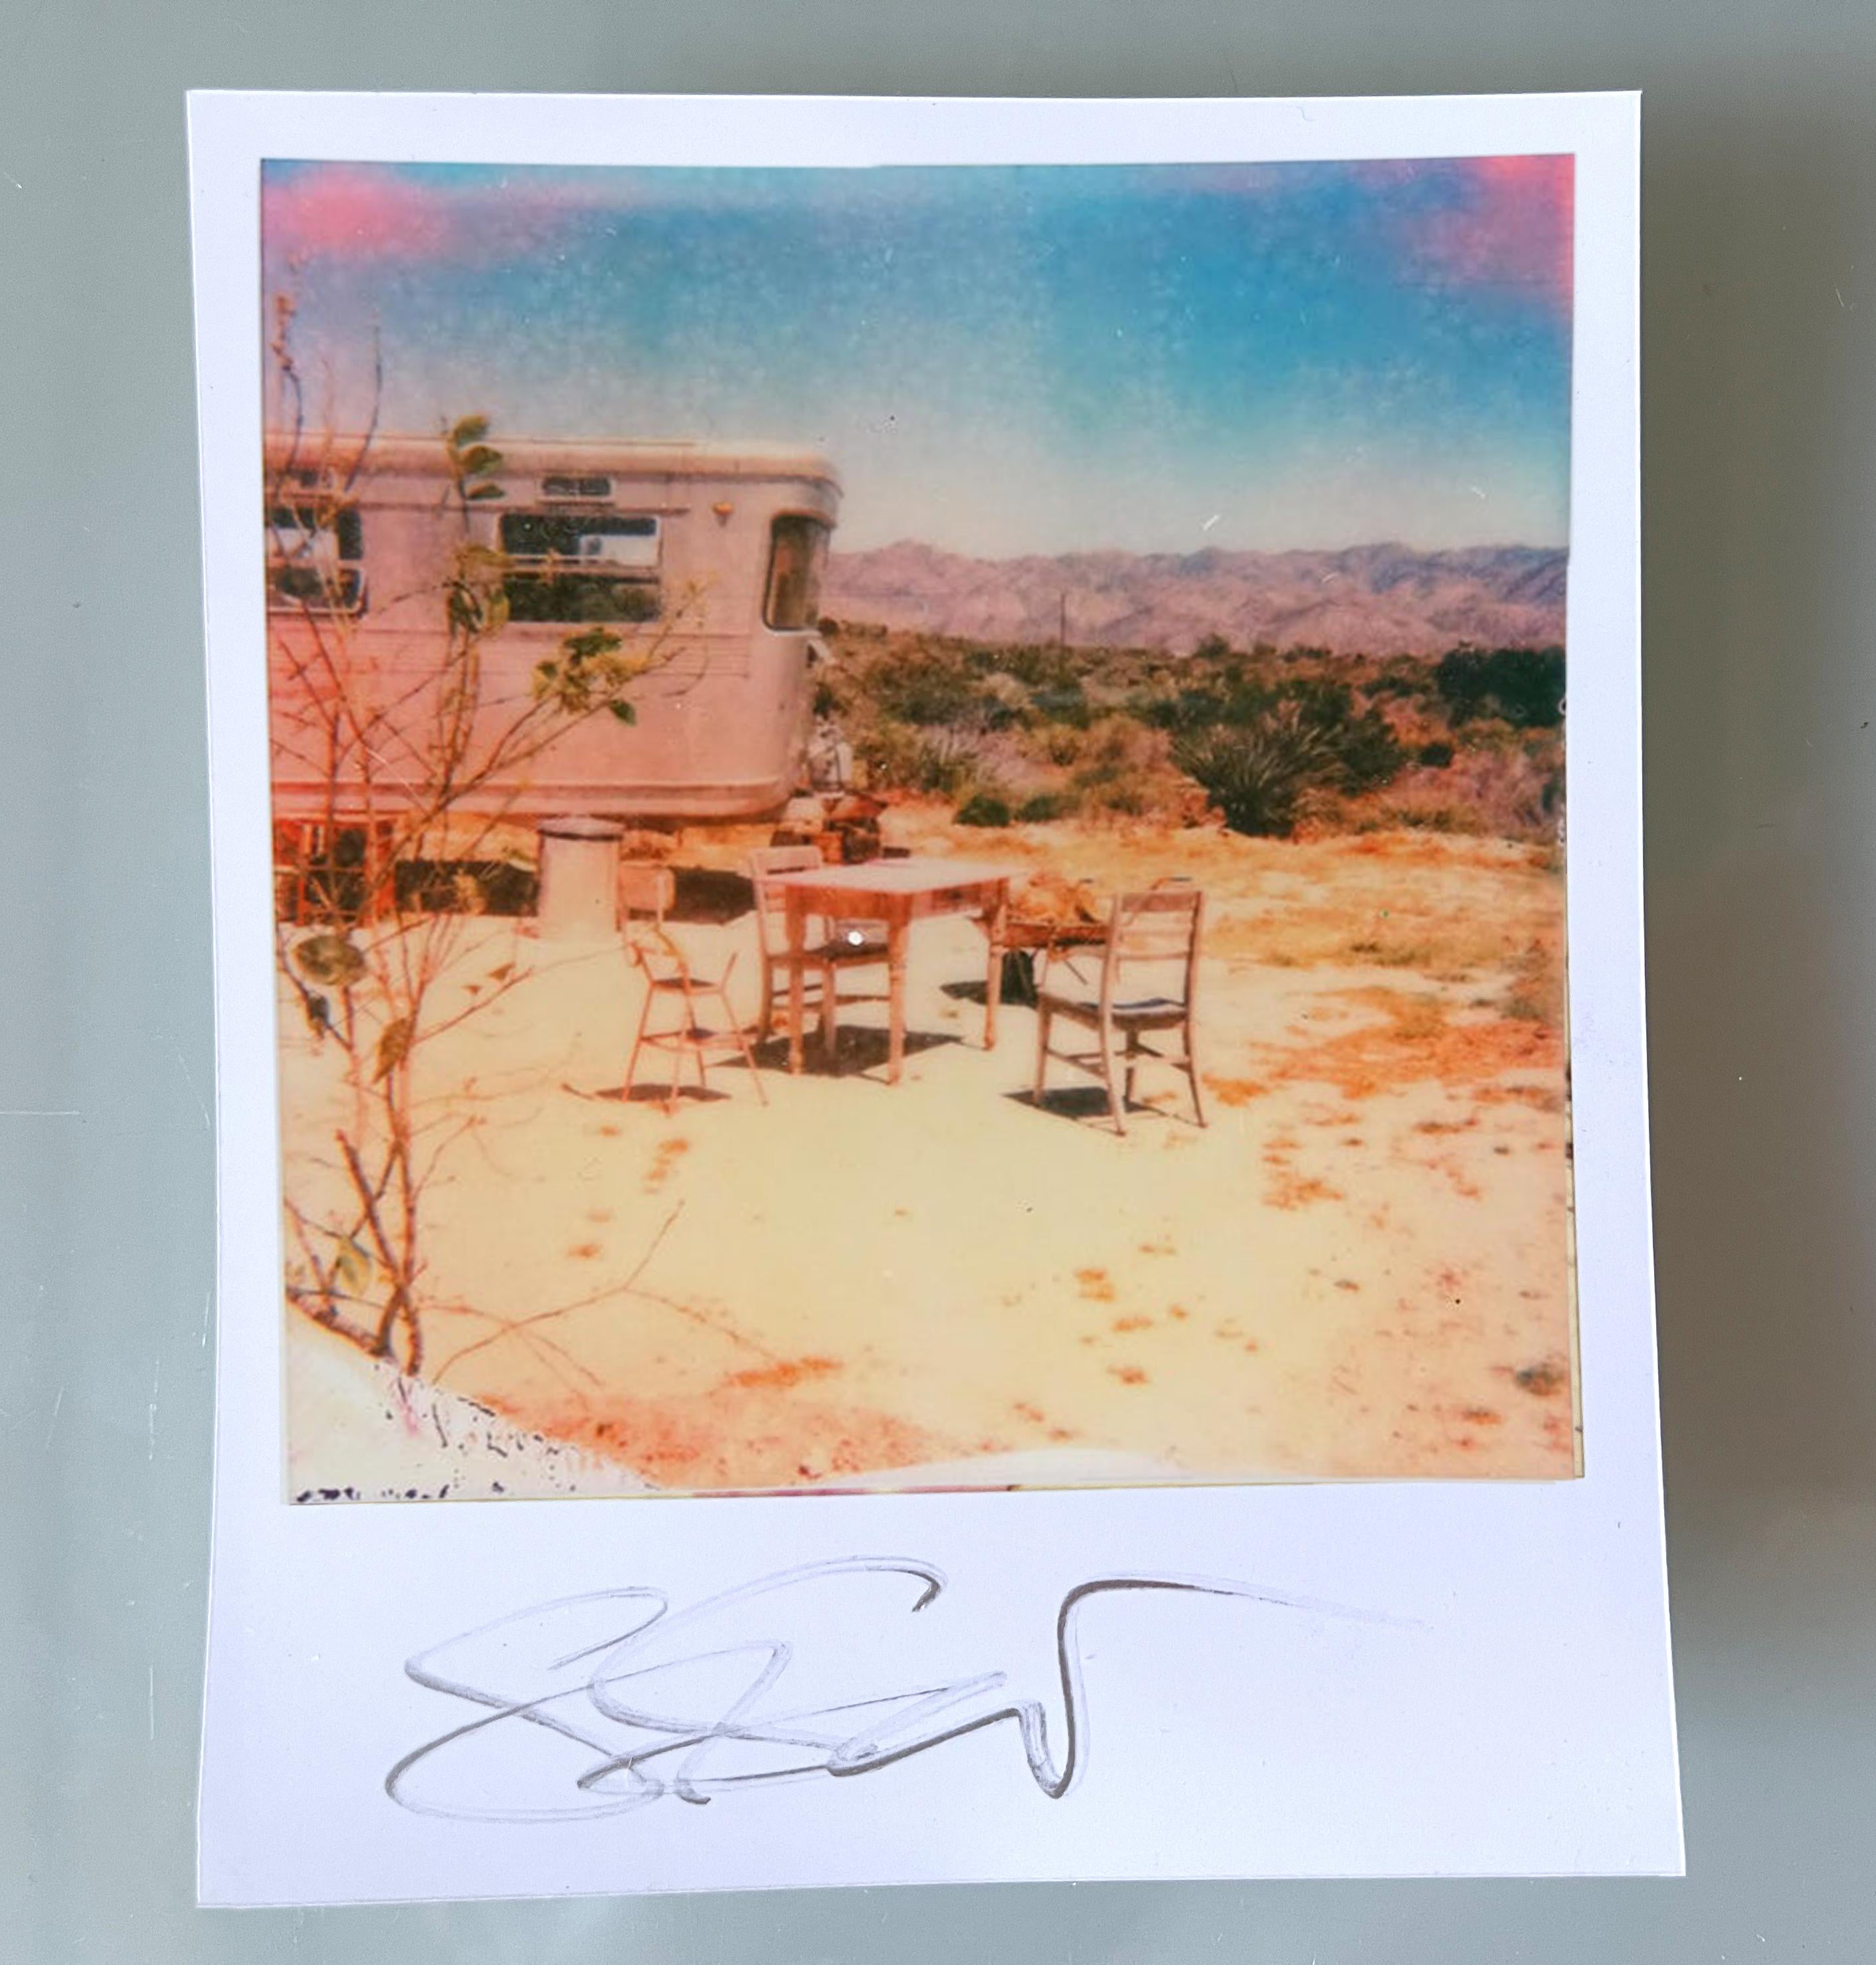 Stefanie Schneider's Mini
The Girl IV (The Girl behind the White Picket Fence) - 2016

signed in front, not mounted.
Digital Color Photographs based on the Polaroids.

Polaroid sized open Editions 1999-2023
10.7 x 8.8cm (Image 7.9x7.7cm)
